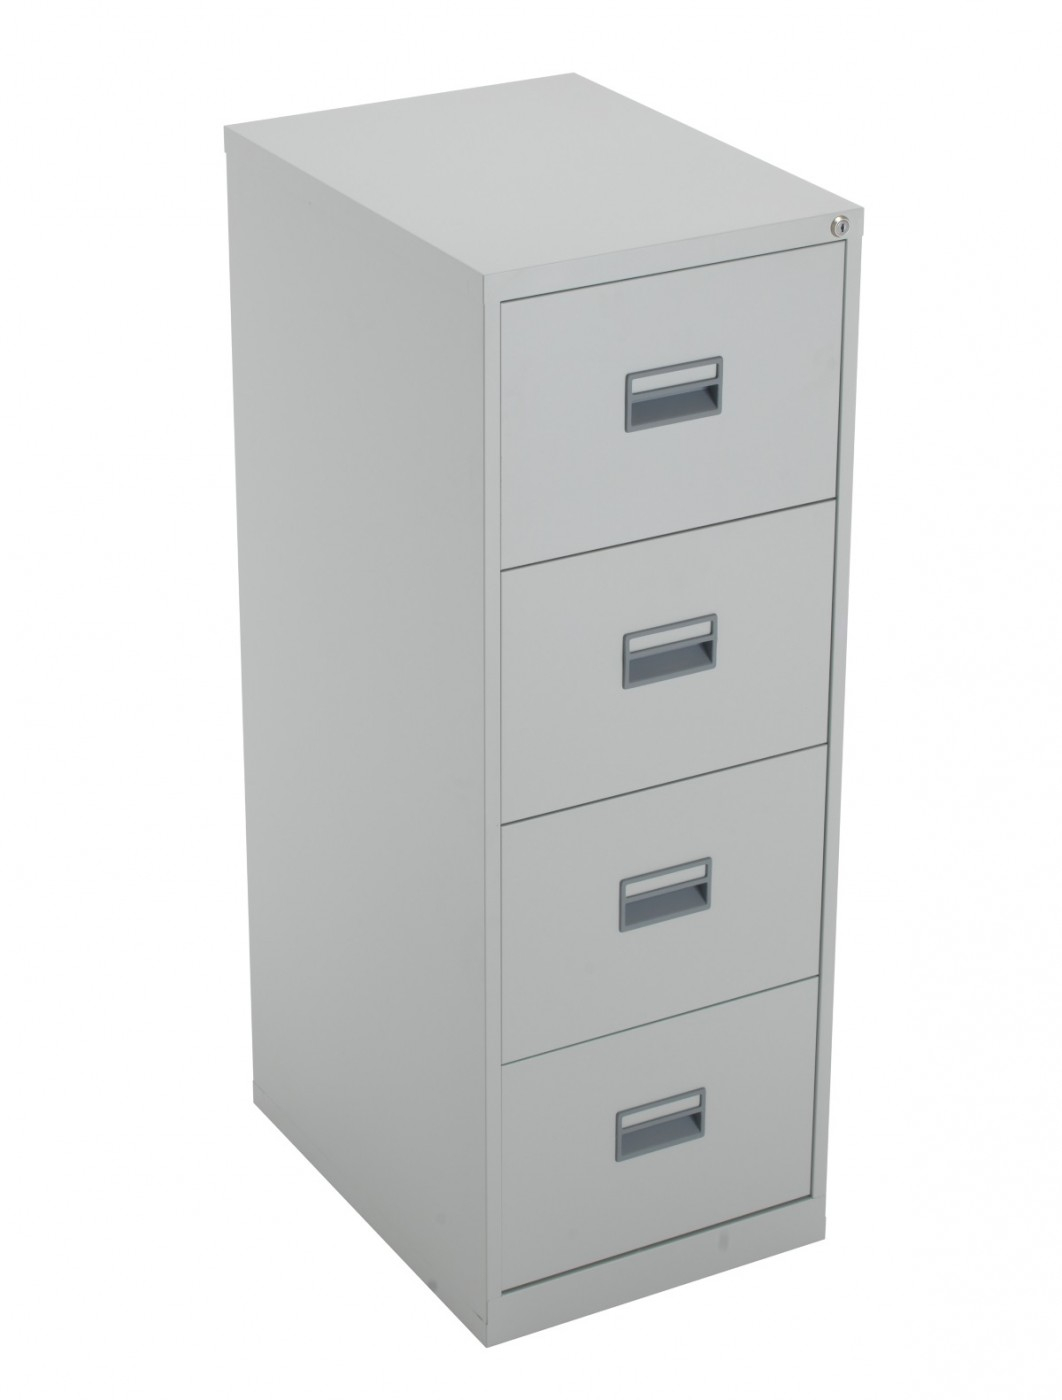 Tc Talos 4 Drawer Steel Filing Cabinet Tcs4fc Gr In Grey 121 within size 1062 X 1400